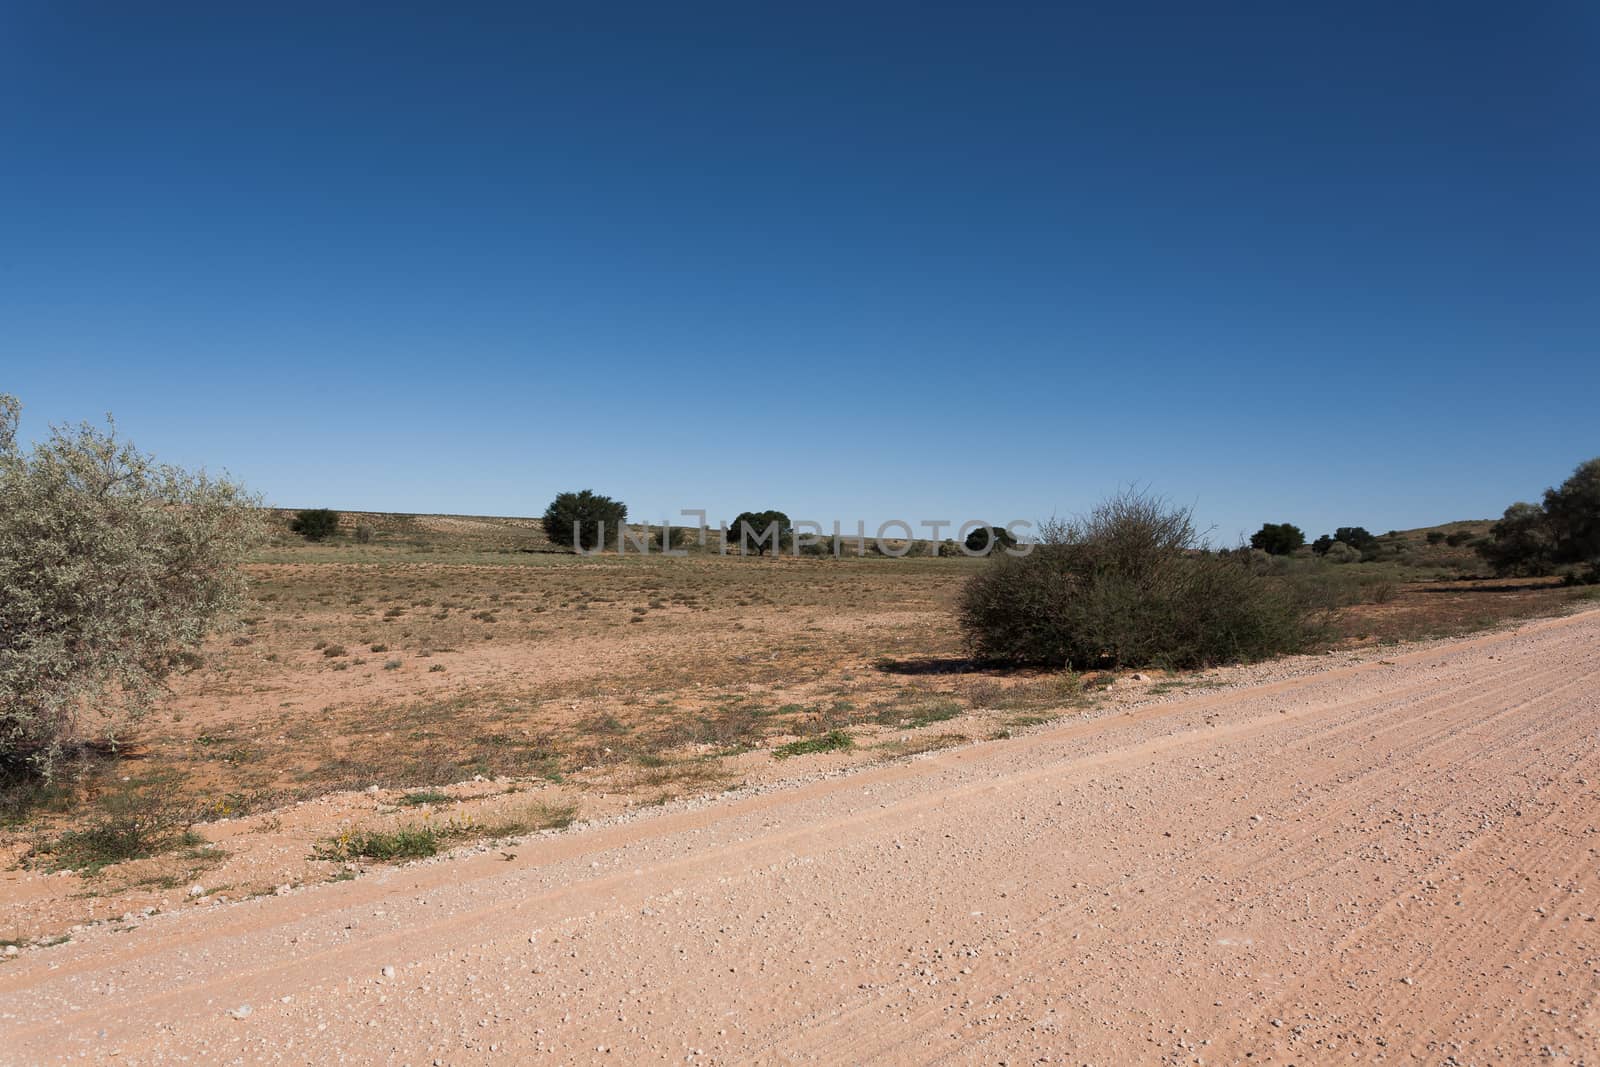 A view from Kgalagadi Transfontier Park, South Africa